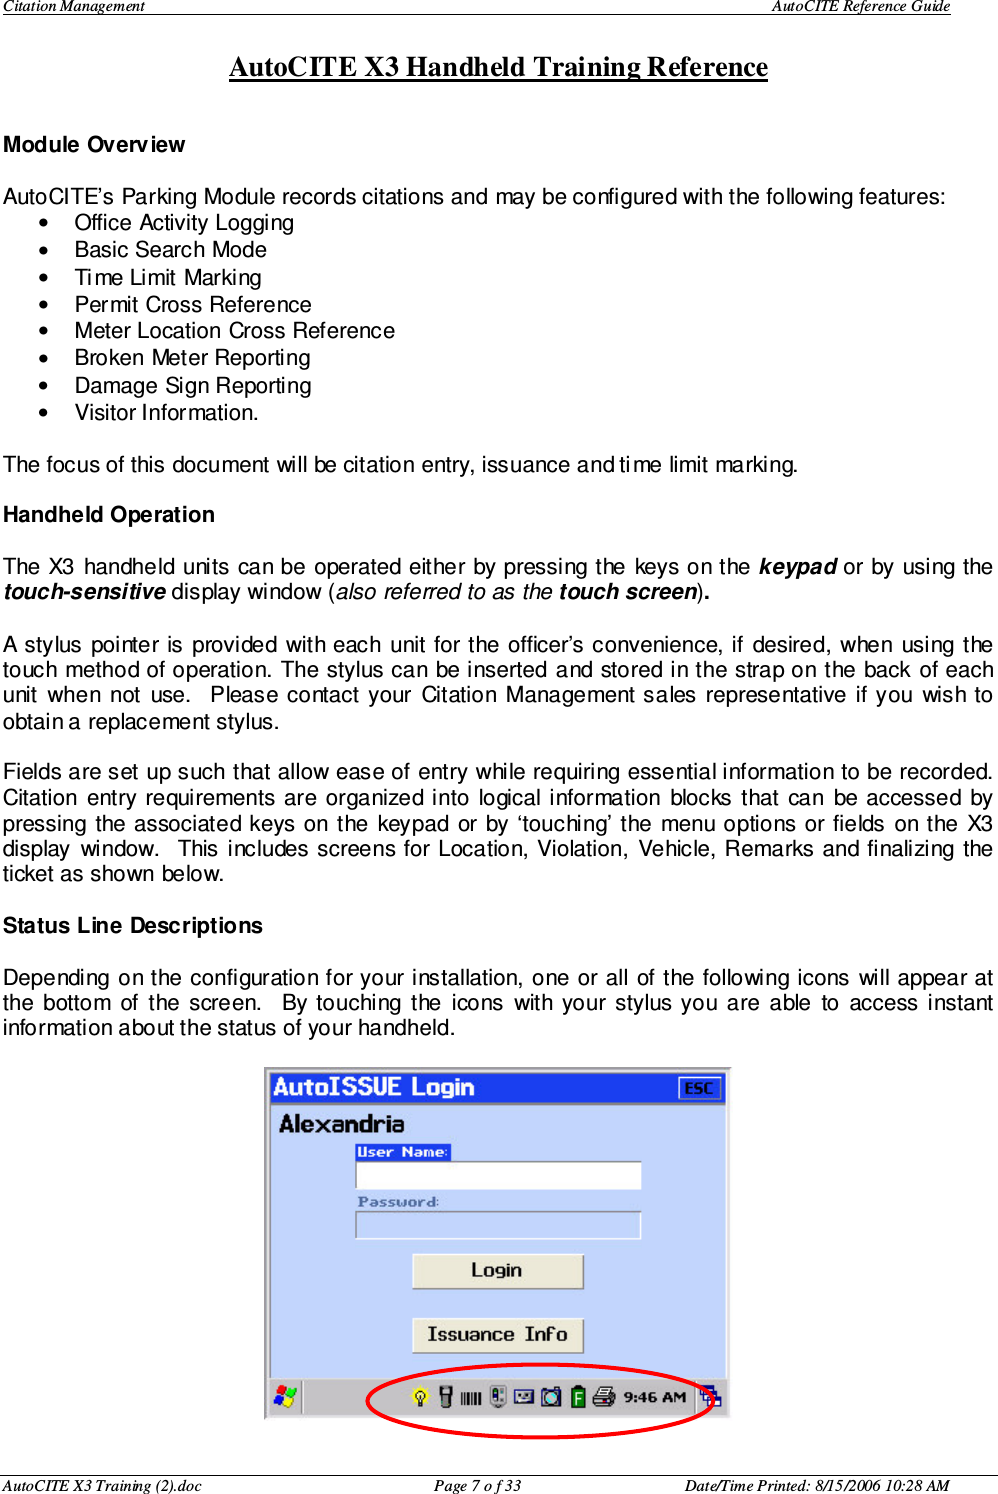 Citation Management    AutoCITE Reference Guide  AutoCITE X3 Handheld Training Reference AutoCITE X3 Training (2).doc  Page 7 o f 33  Date/Time Printed: 8/15/2006 10:28 AM Module Overview  AutoCITE’s Parking Module records citations and may be configured with the following features: •  Office Activity Logging •  Basic Search Mode •  Time Limit Marking •  Permit Cross Reference •  Meter Location Cross Reference •  Broken Meter Reporting •  Damage Sign Reporting •  Visitor Information.  The focus of this document will be citation entry, issuance and time limit marking.   Handheld Operation  The X3  handheld  units can be operated either  by pressing the  keys on the keypad or  by using the touch-sensitive display window (also referred to as the touch screen).    A stylus  pointer is  provided with each unit for the  officer’s convenience, if  desired,  when using the touch method of operation. The stylus can  be inserted  and stored in the strap on the back  of each unit  when  not  use.    Please  contact  your  Citation  Management sales  representative  if  you  wish to obtain a replacement stylus.  Fields are set up such that allow ease of entry while requiring essential information to be recorded.  Citation  entry  requirements are  organized into  logical  information  blocks  that  can  be accessed  by pressing the associated  keys on the  keypad  or  by ‘touching’ the  menu options  or fields  on the  X3 display  window.   This includes screens for Location, Violation,  Vehicle, Remarks and finalizing the ticket as shown below.  Status Line Descriptions  Depending on the configuration for your installation, one or all of the following icons  will appear at the  bottom  of  the  screen.    By touching  the  icons  with  your  stylus you  are  able  to  access  instant information about the status of your handheld.   